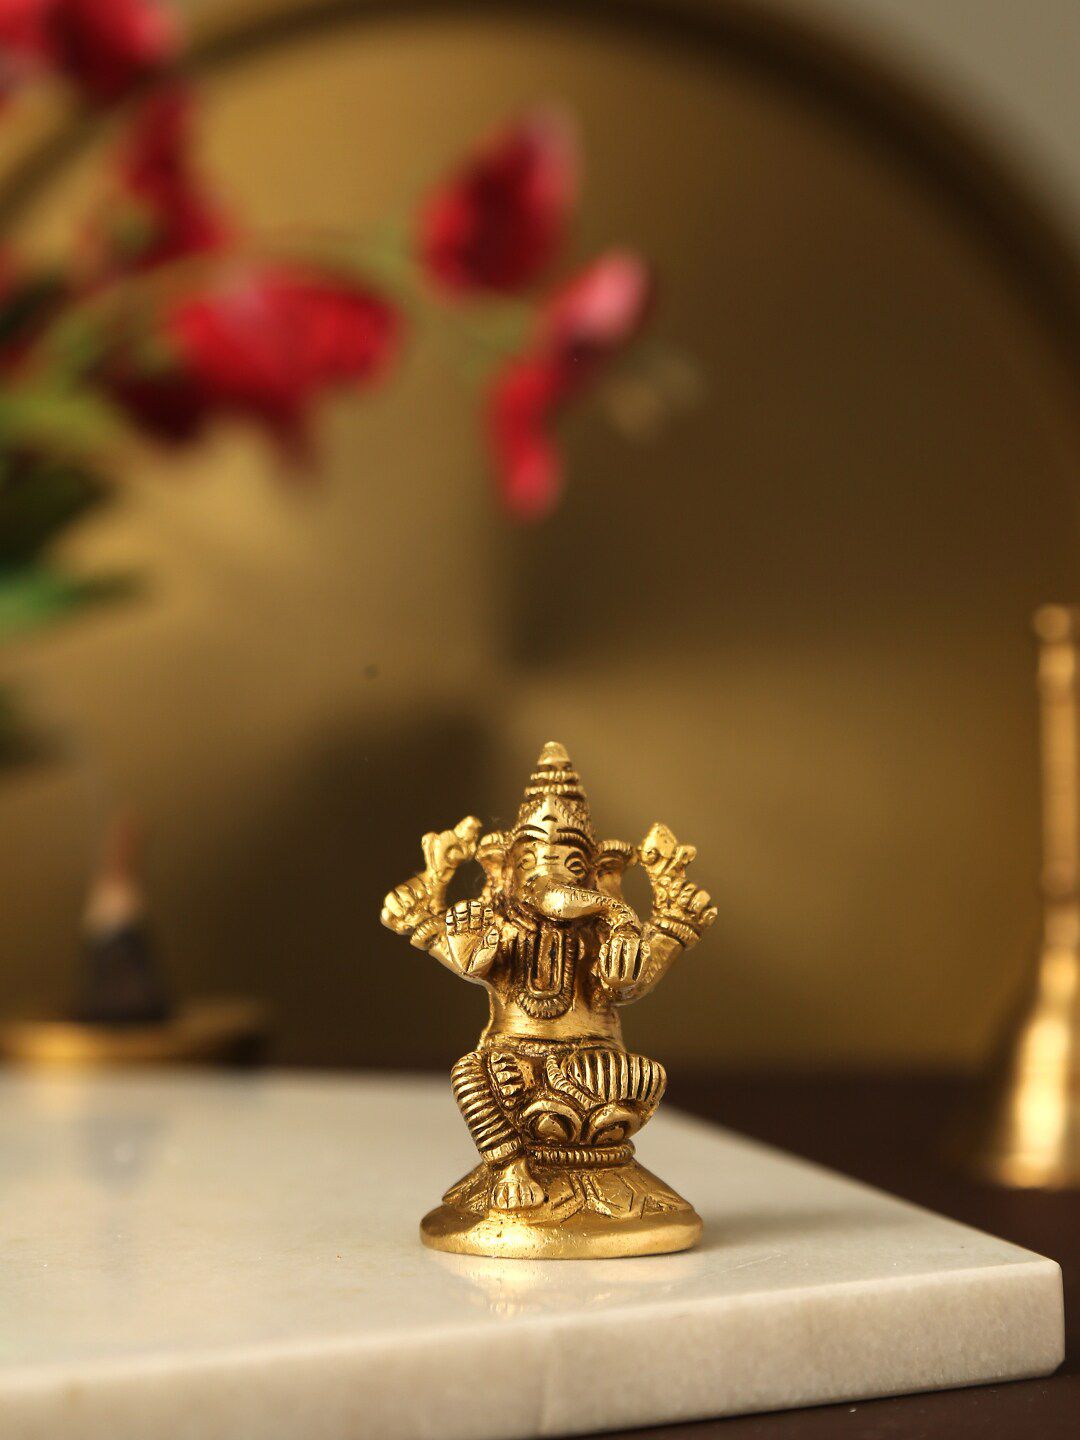 Amoliconcepts Gold-Toned Lord Ganesha Idol Showpiece Price in India